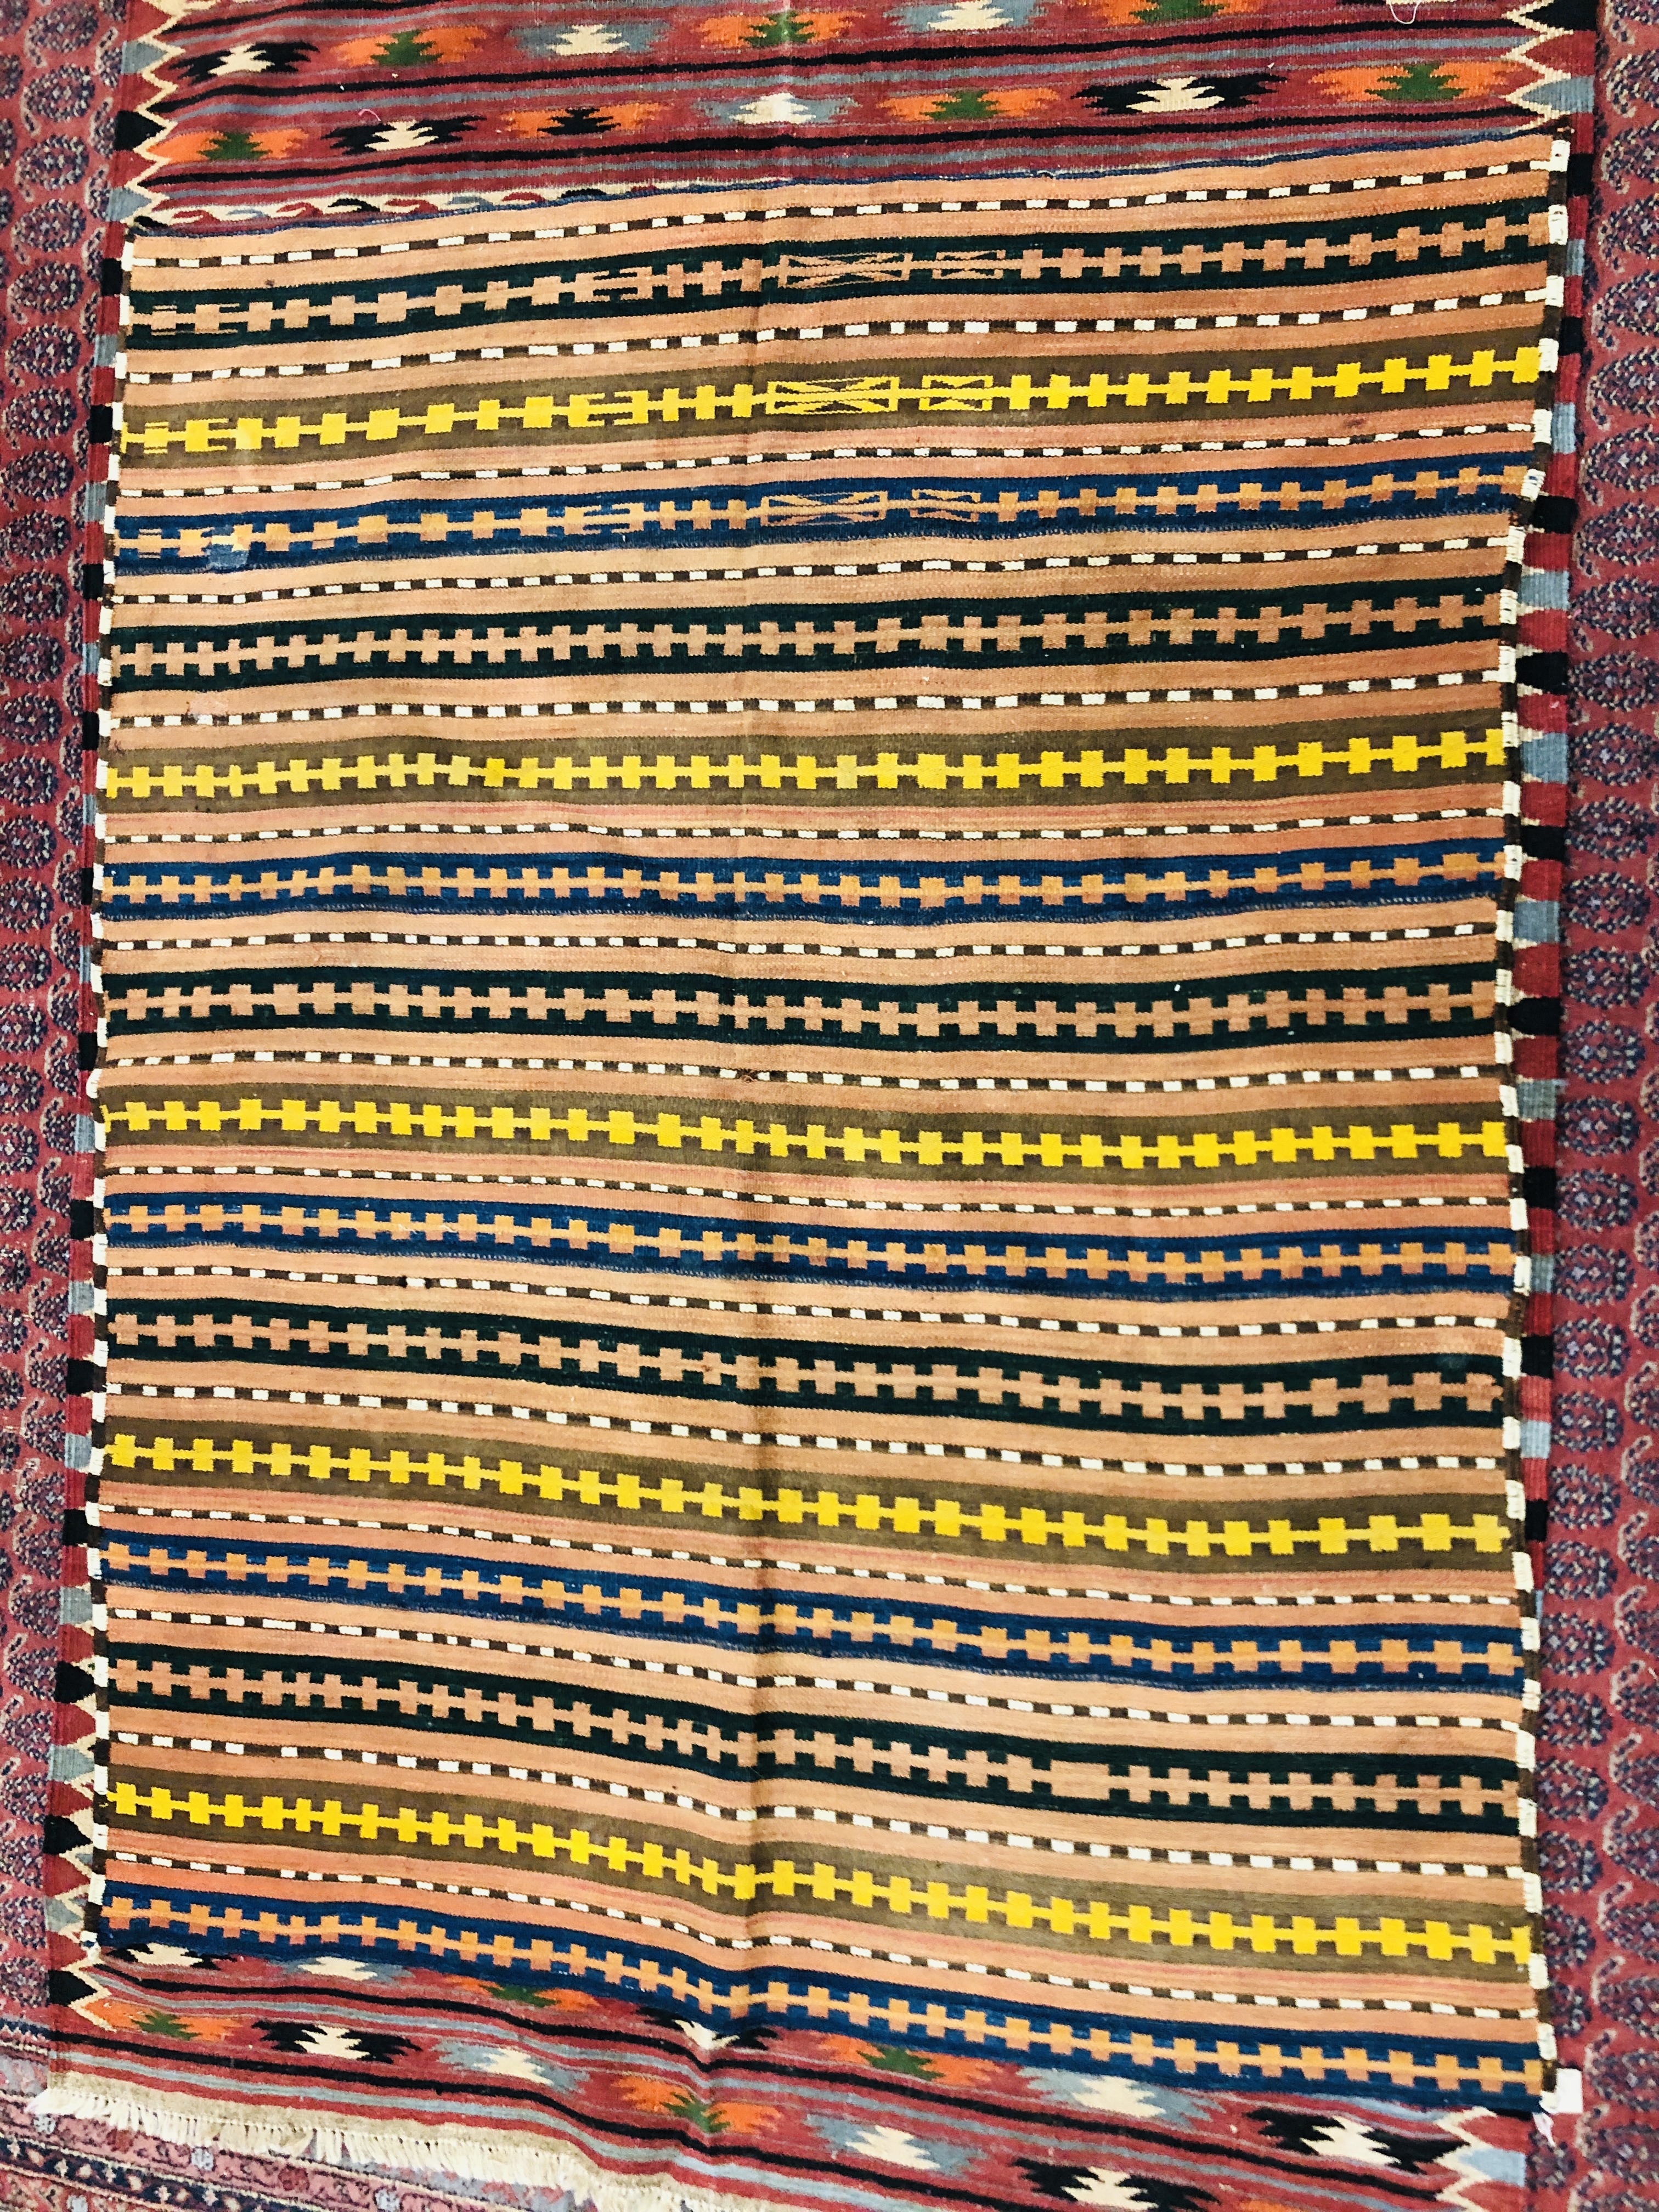 TWO PERSAIN STYLE FLAT WEAVE RUGS 280CM. X 138CM. , 169CM. X 138CM. - Image 4 of 12